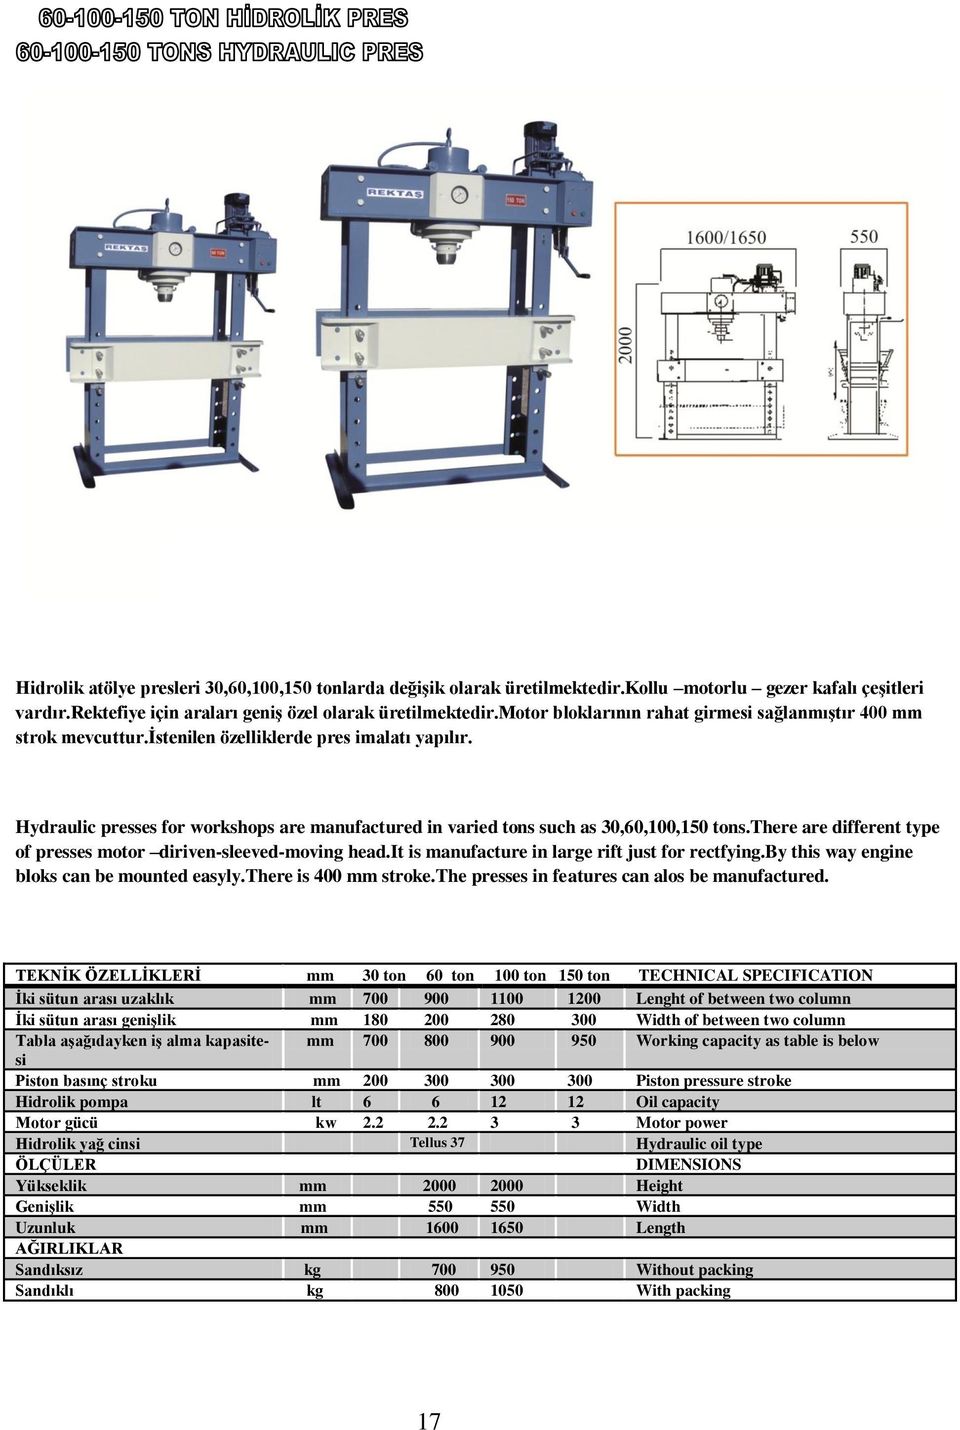 Hydraulic presses for workshops are manufactured in varied tons such as 30,60,100,150 tons.there are different type of presses motor diriven-sleeved-moving head.